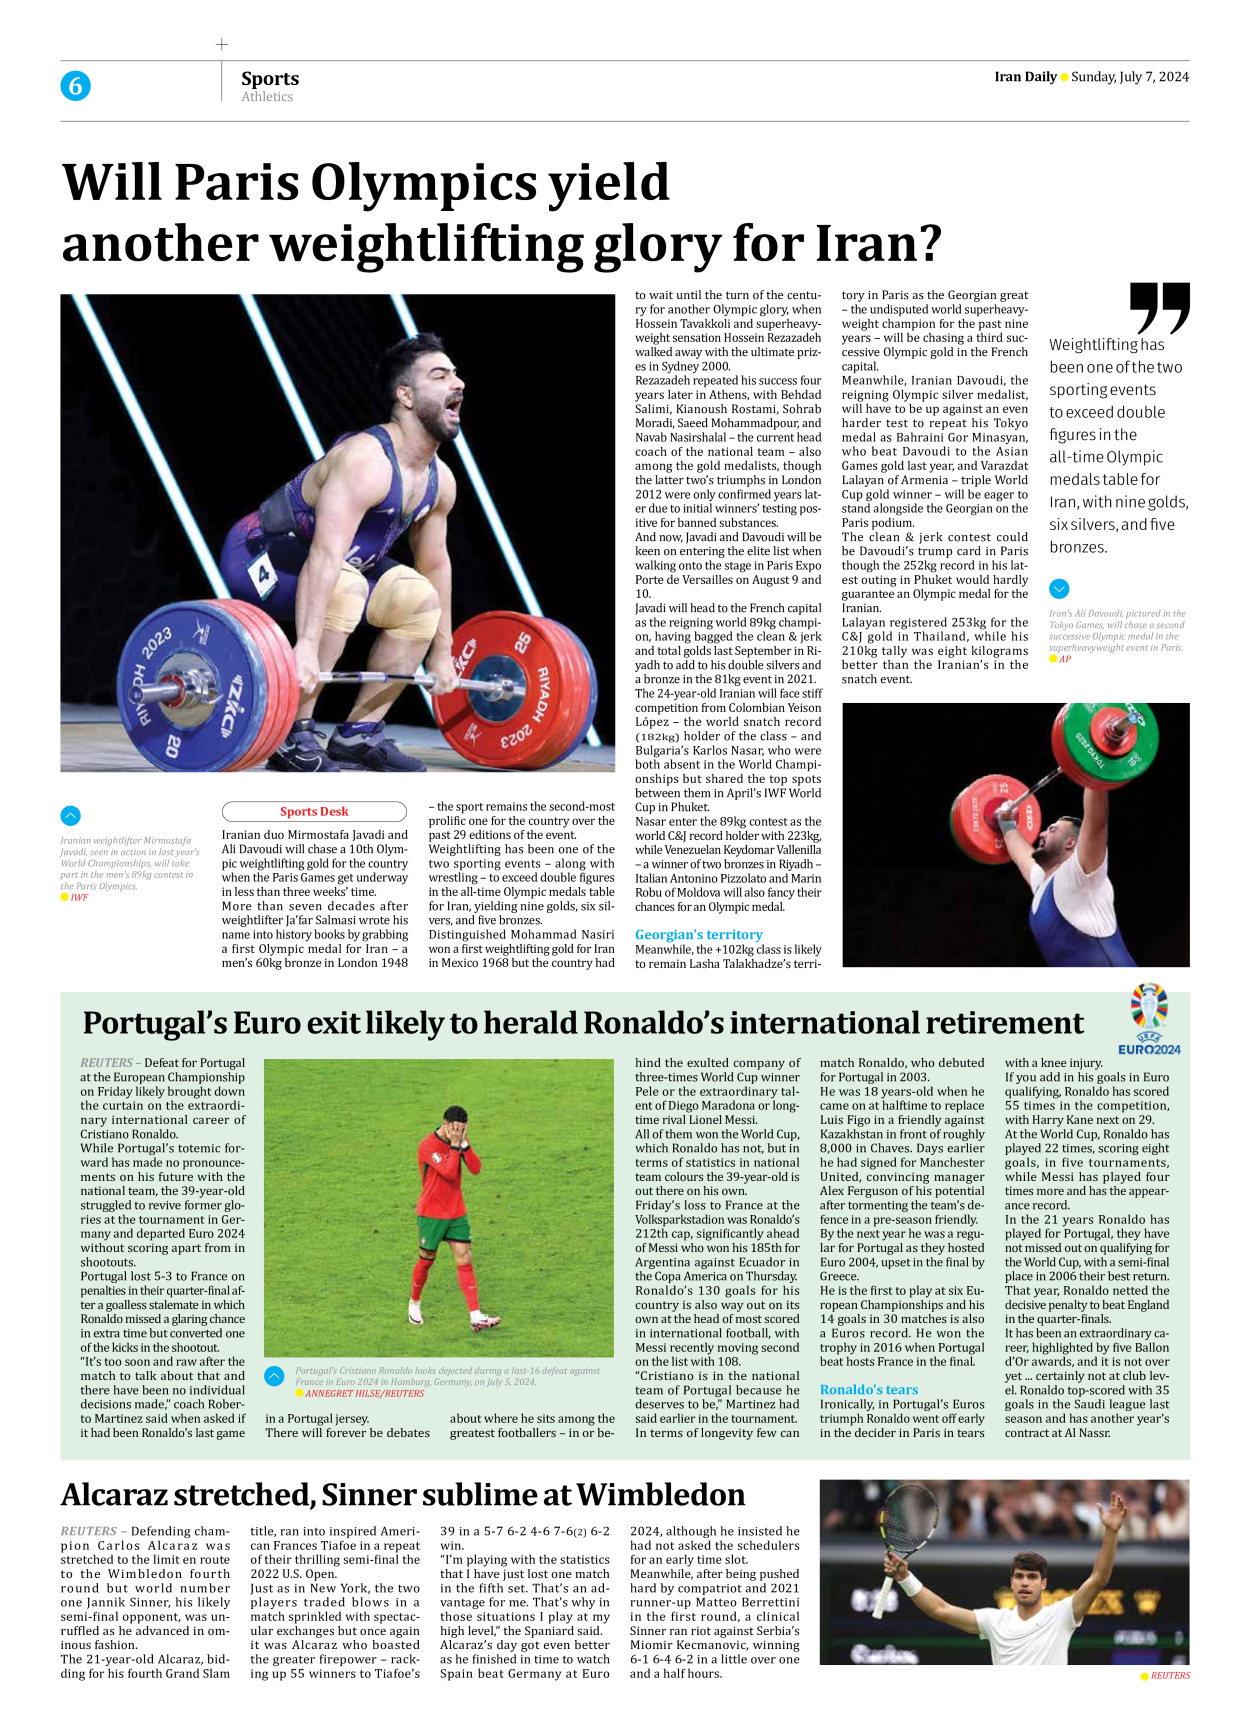 Iran Daily - Number Seven Thousand Five Hundred and Ninety Eight - 07 July 2024 - Page 6